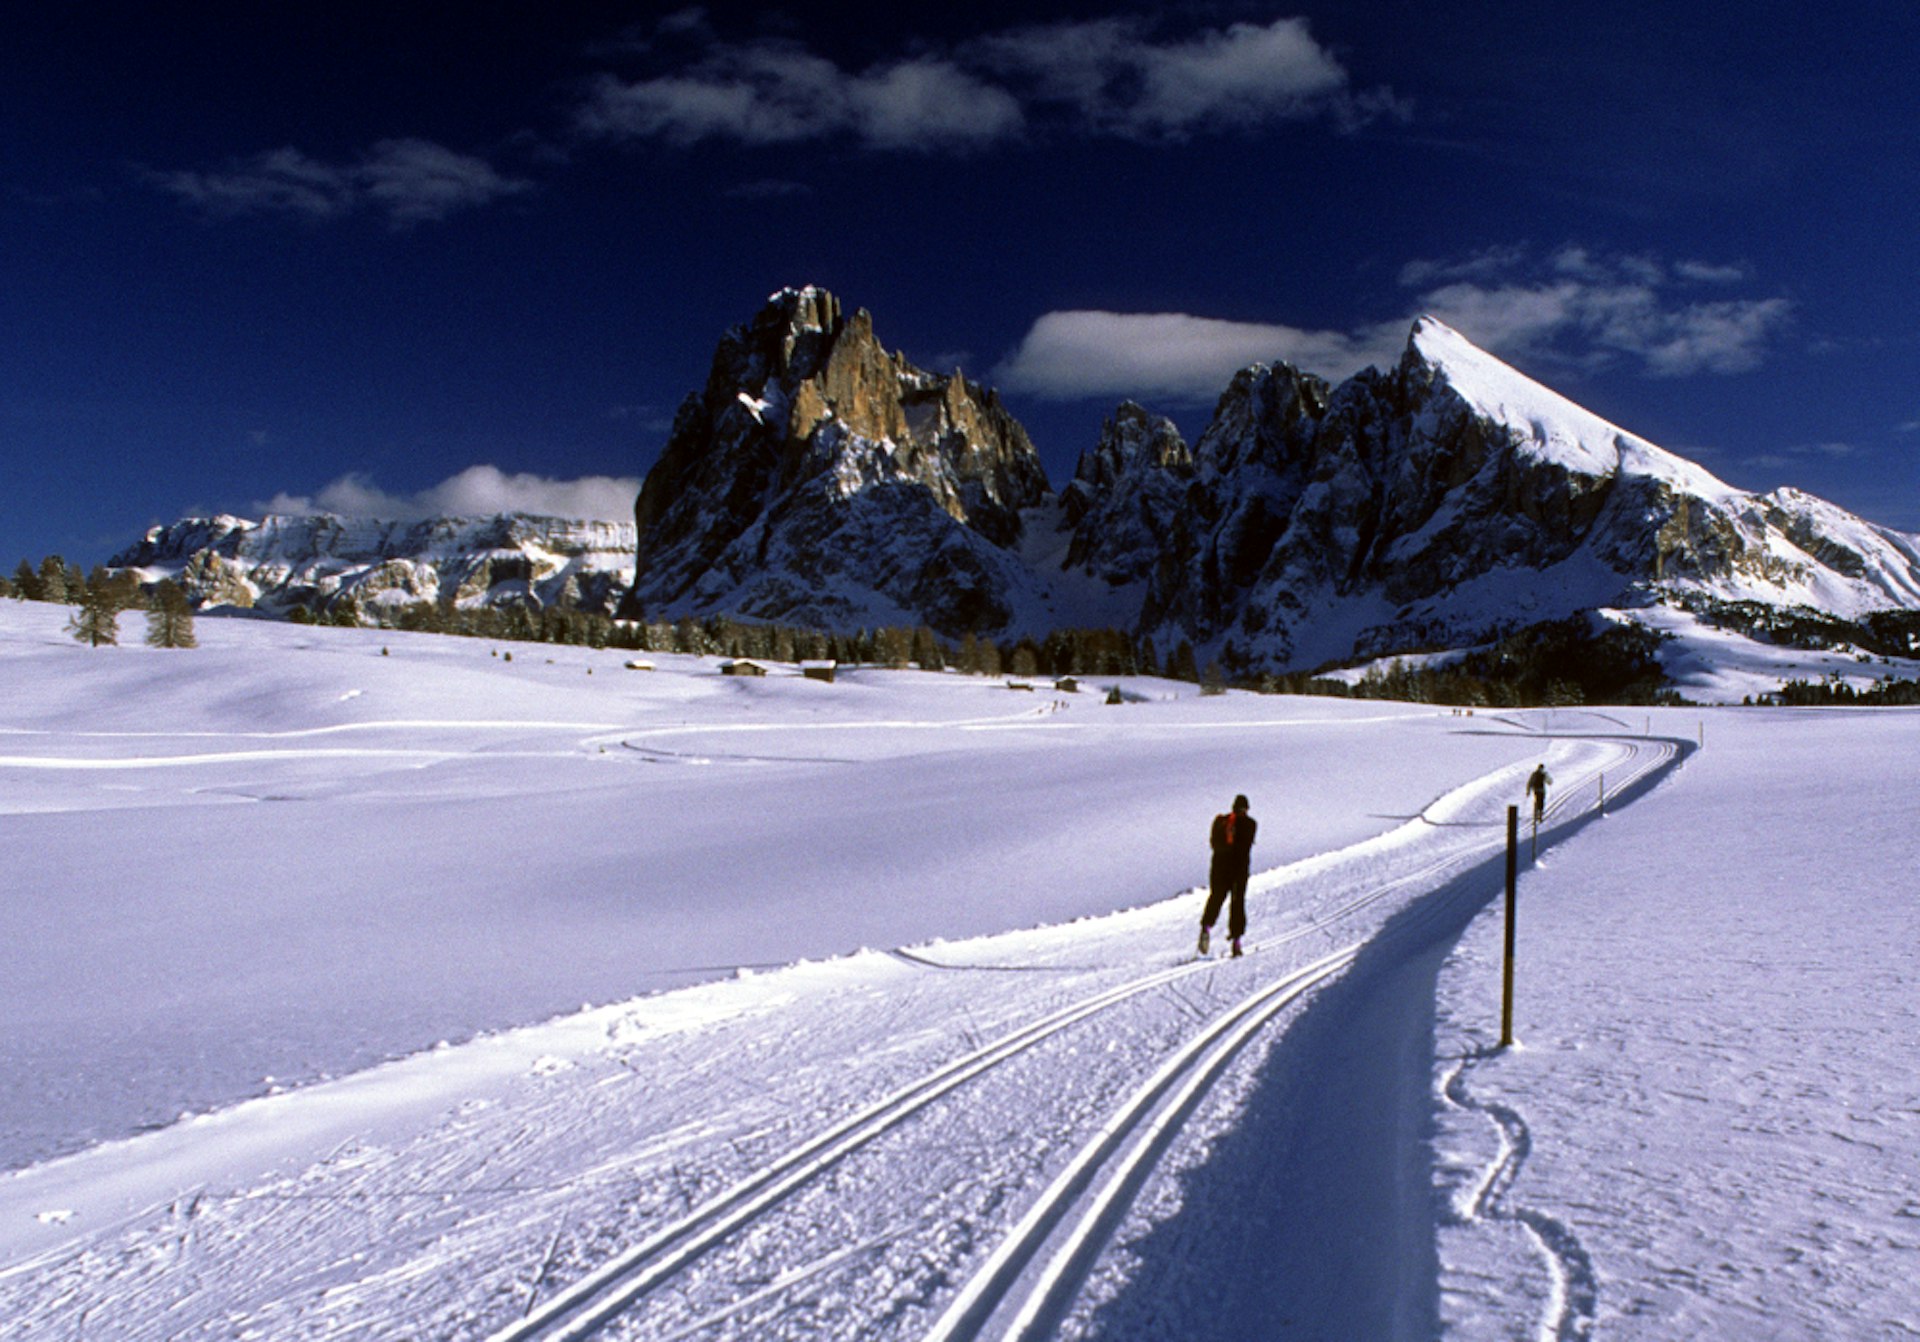 Alpe-di-Siusi is a paradise for cross-country skiers